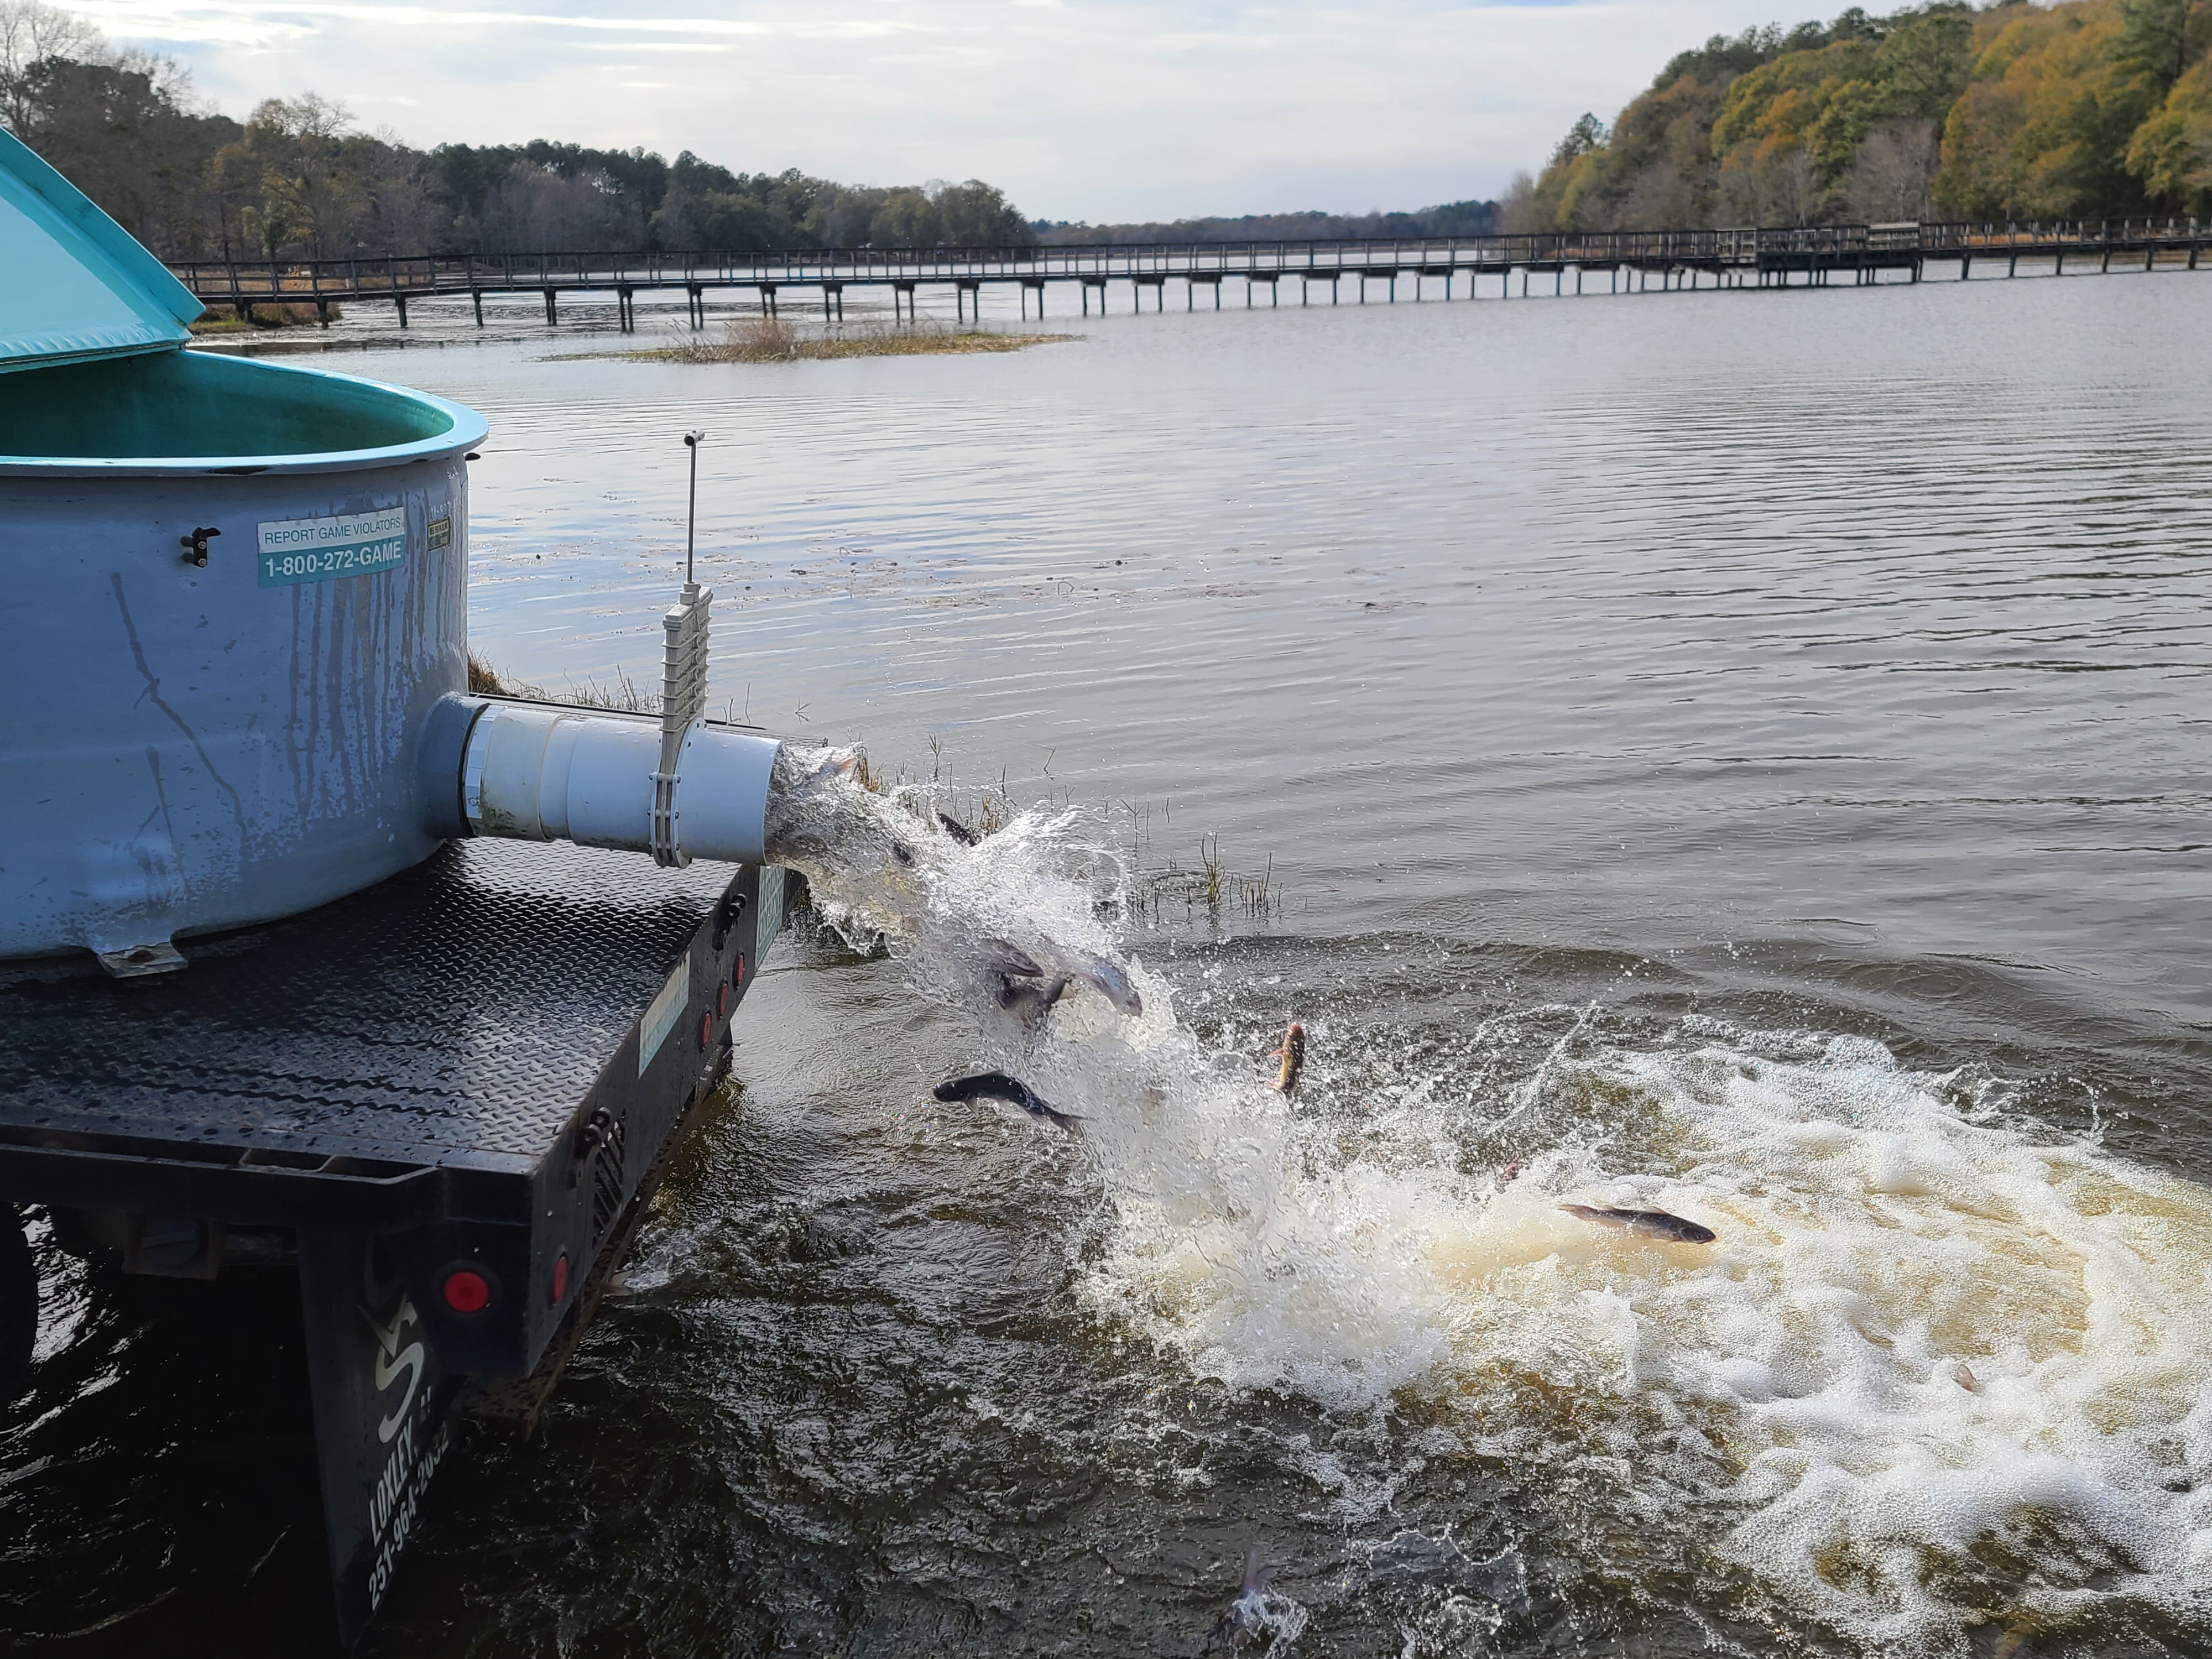 Multi-Year Catfish Project Begins at Frank Jackson State Park